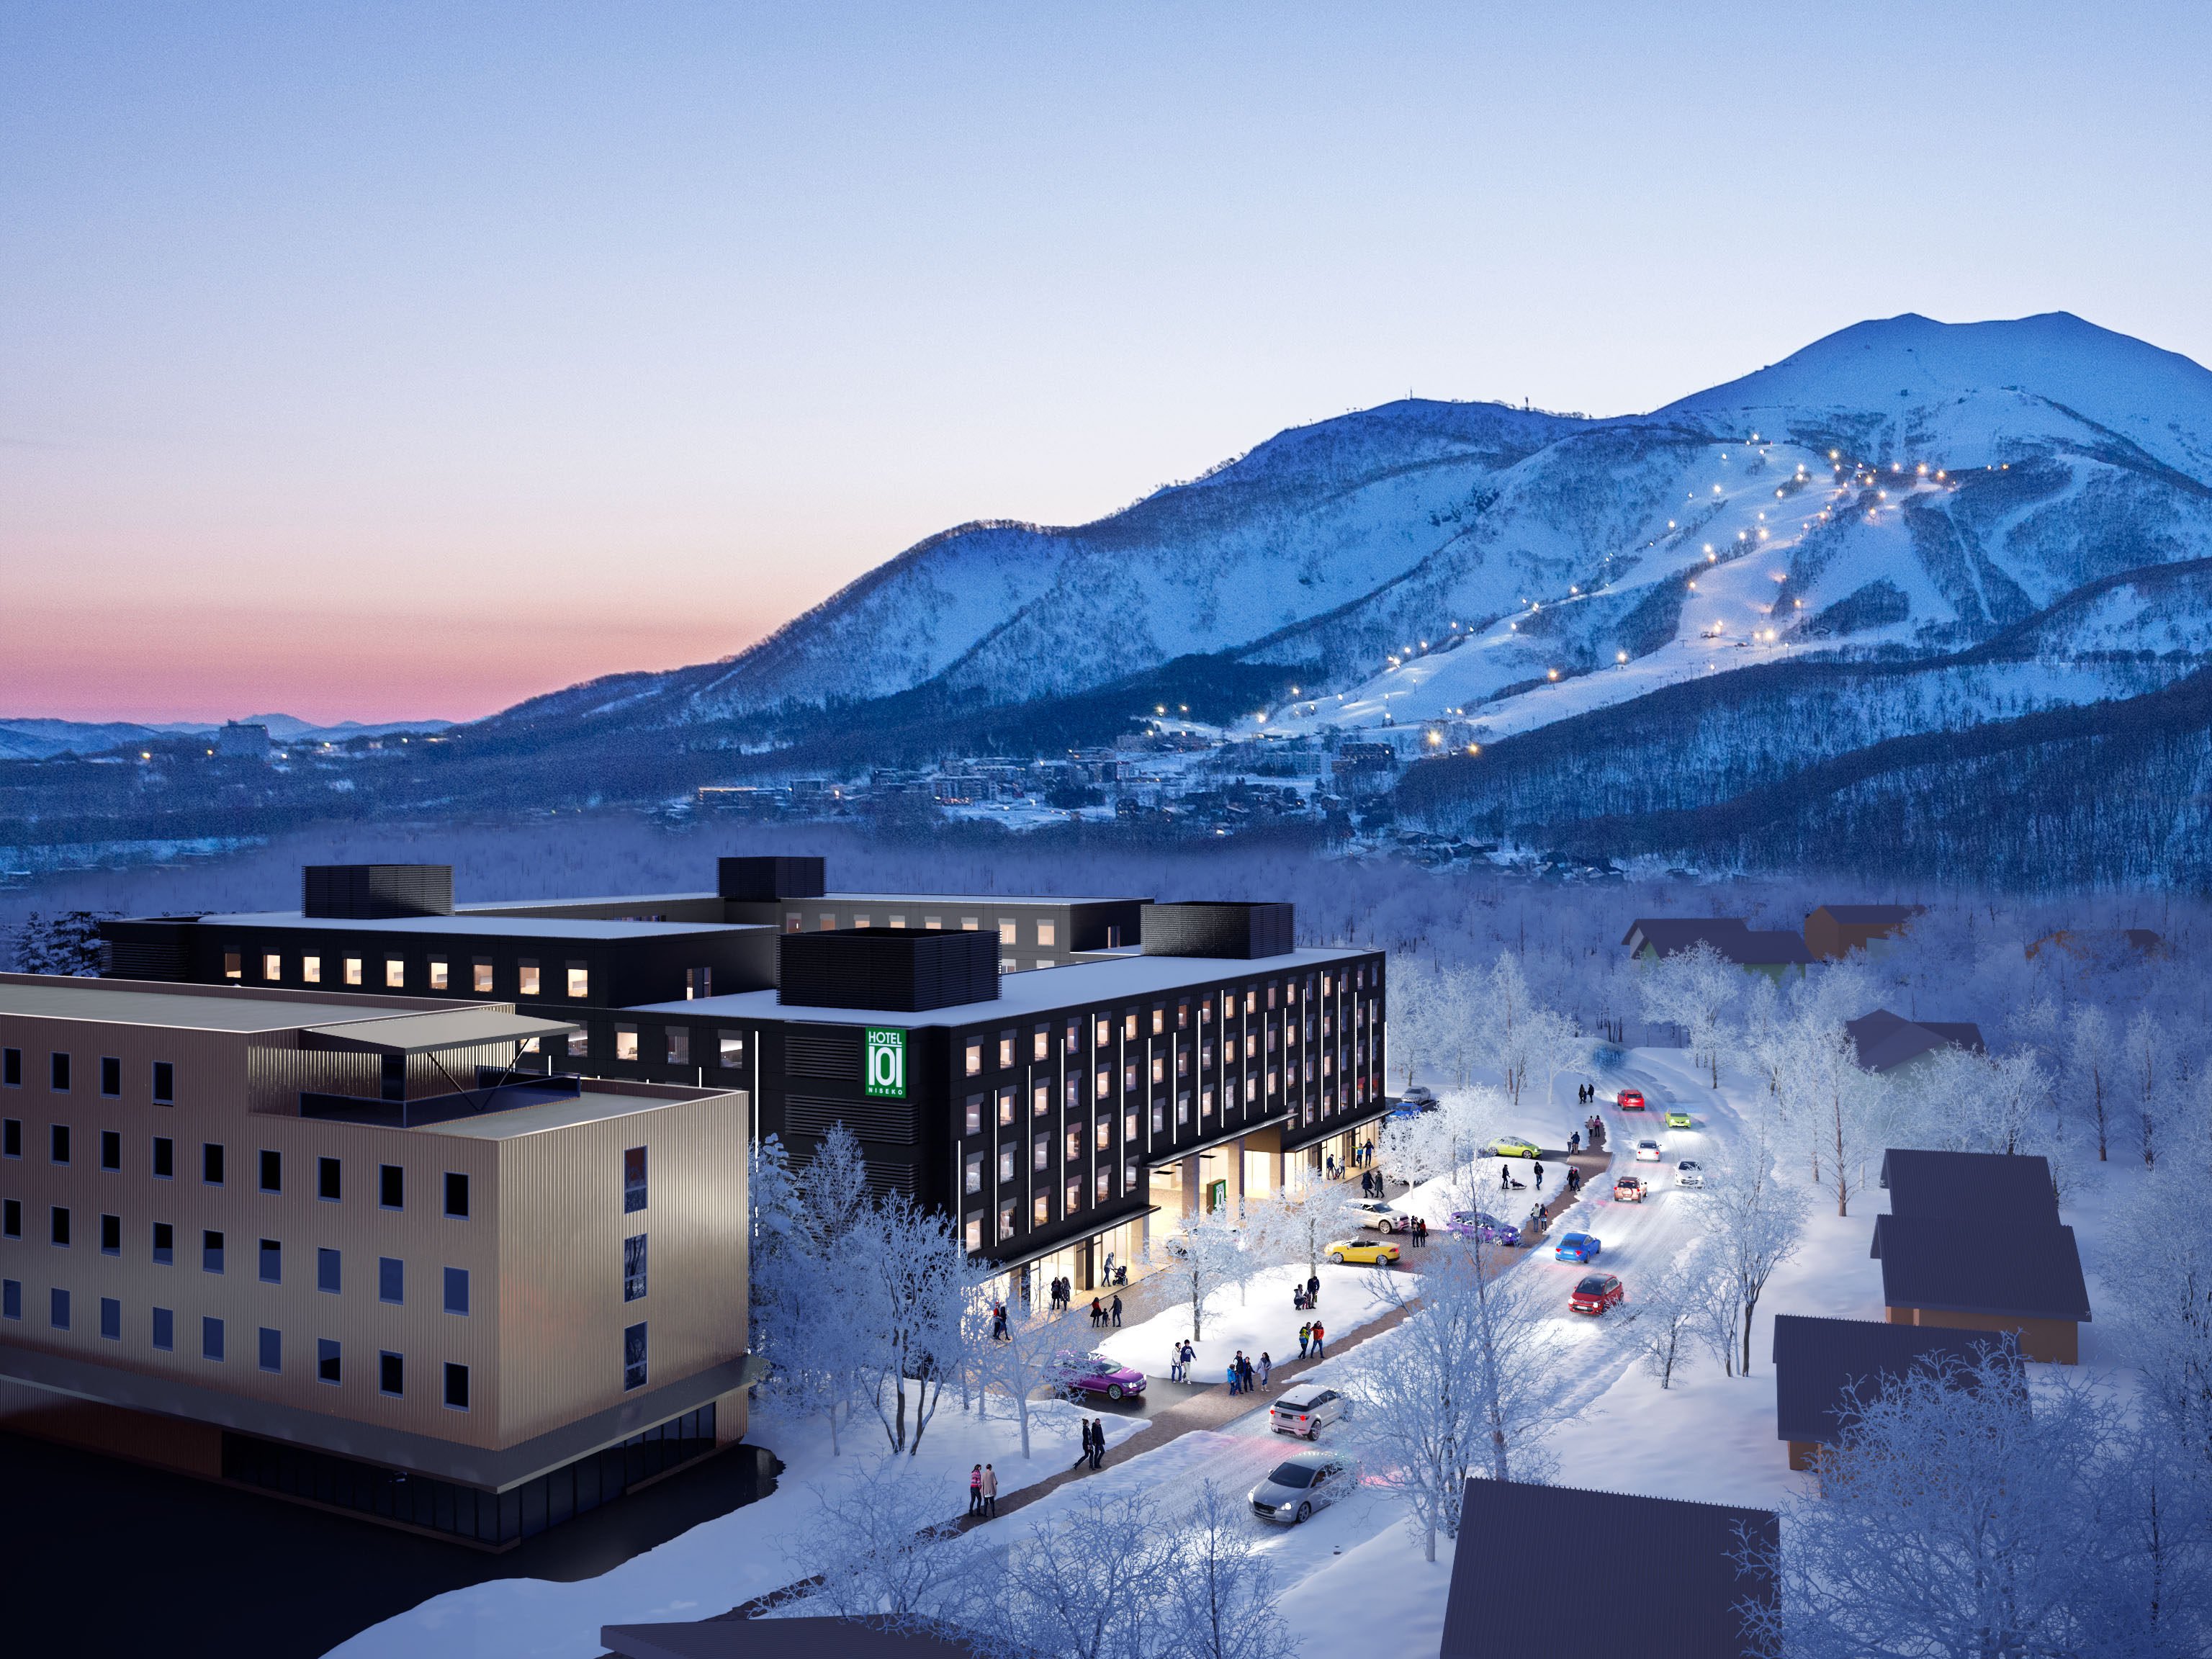 Hotel 101 Niseko Hotel101 eyes to deploy the same room in all its hotels across the globe as it seeks standardisation of the mid-market segment. Photo: Handout.